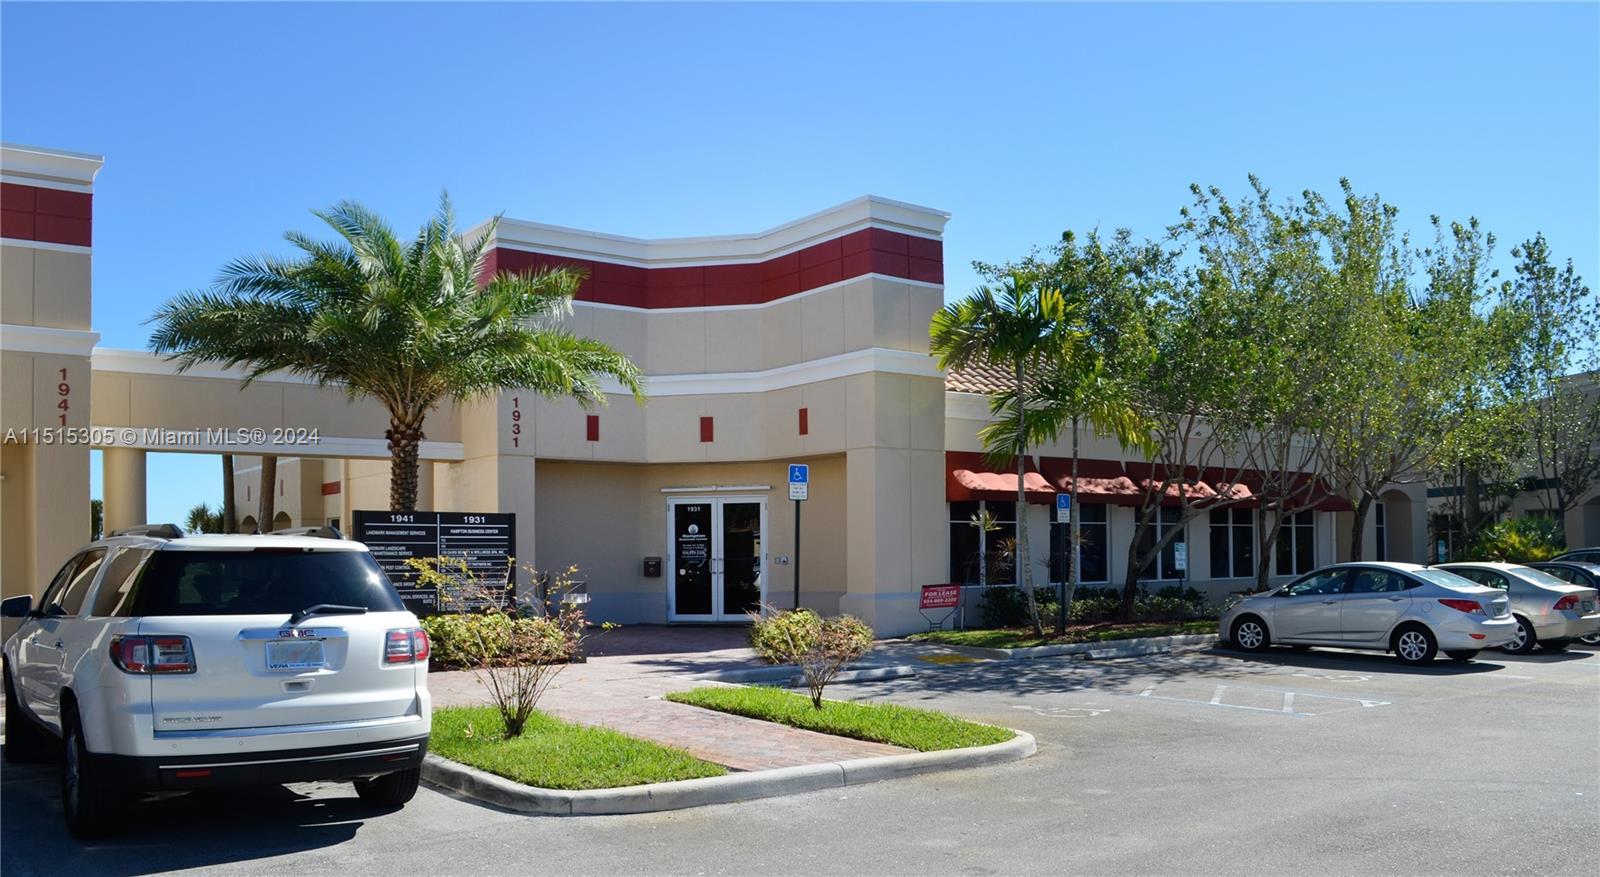 Photo of 1931 NW 150th Ave #110 in Pembroke Pines, FL